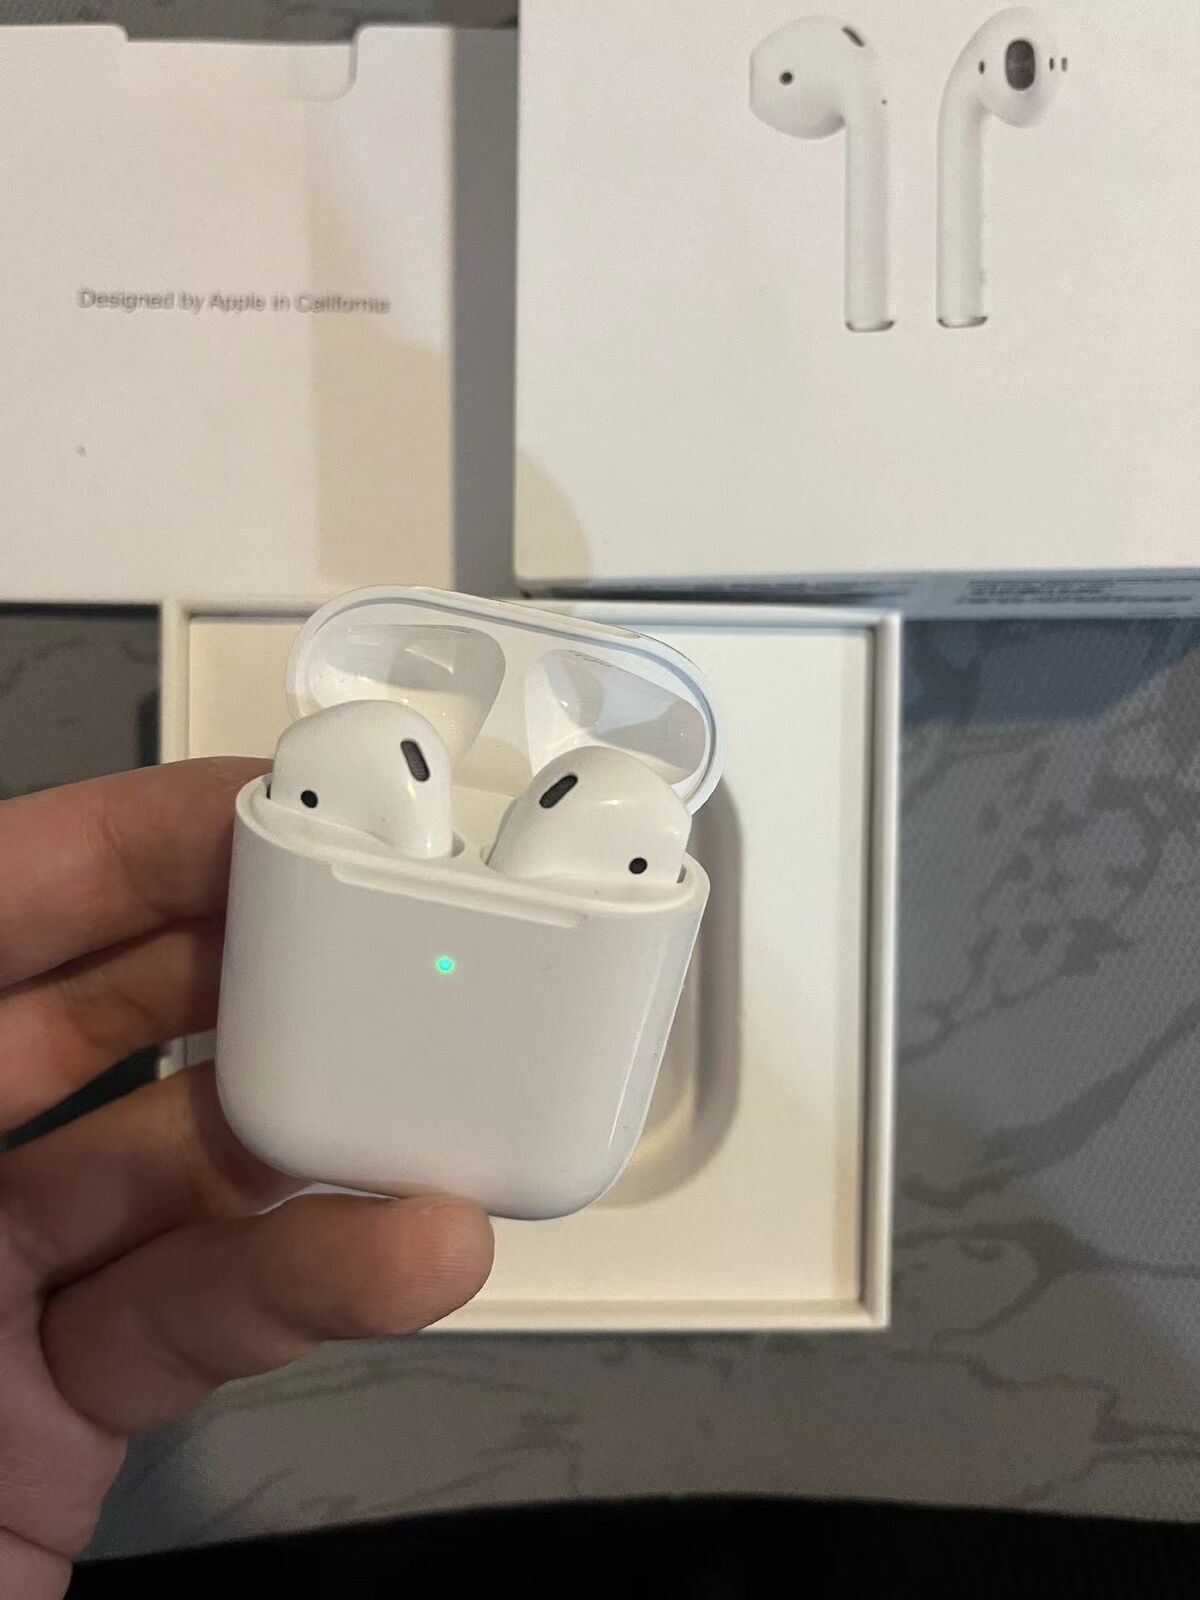 Apple Airpods 2nd Generation Bluetooth Earbuds Earphone +Charging Case White